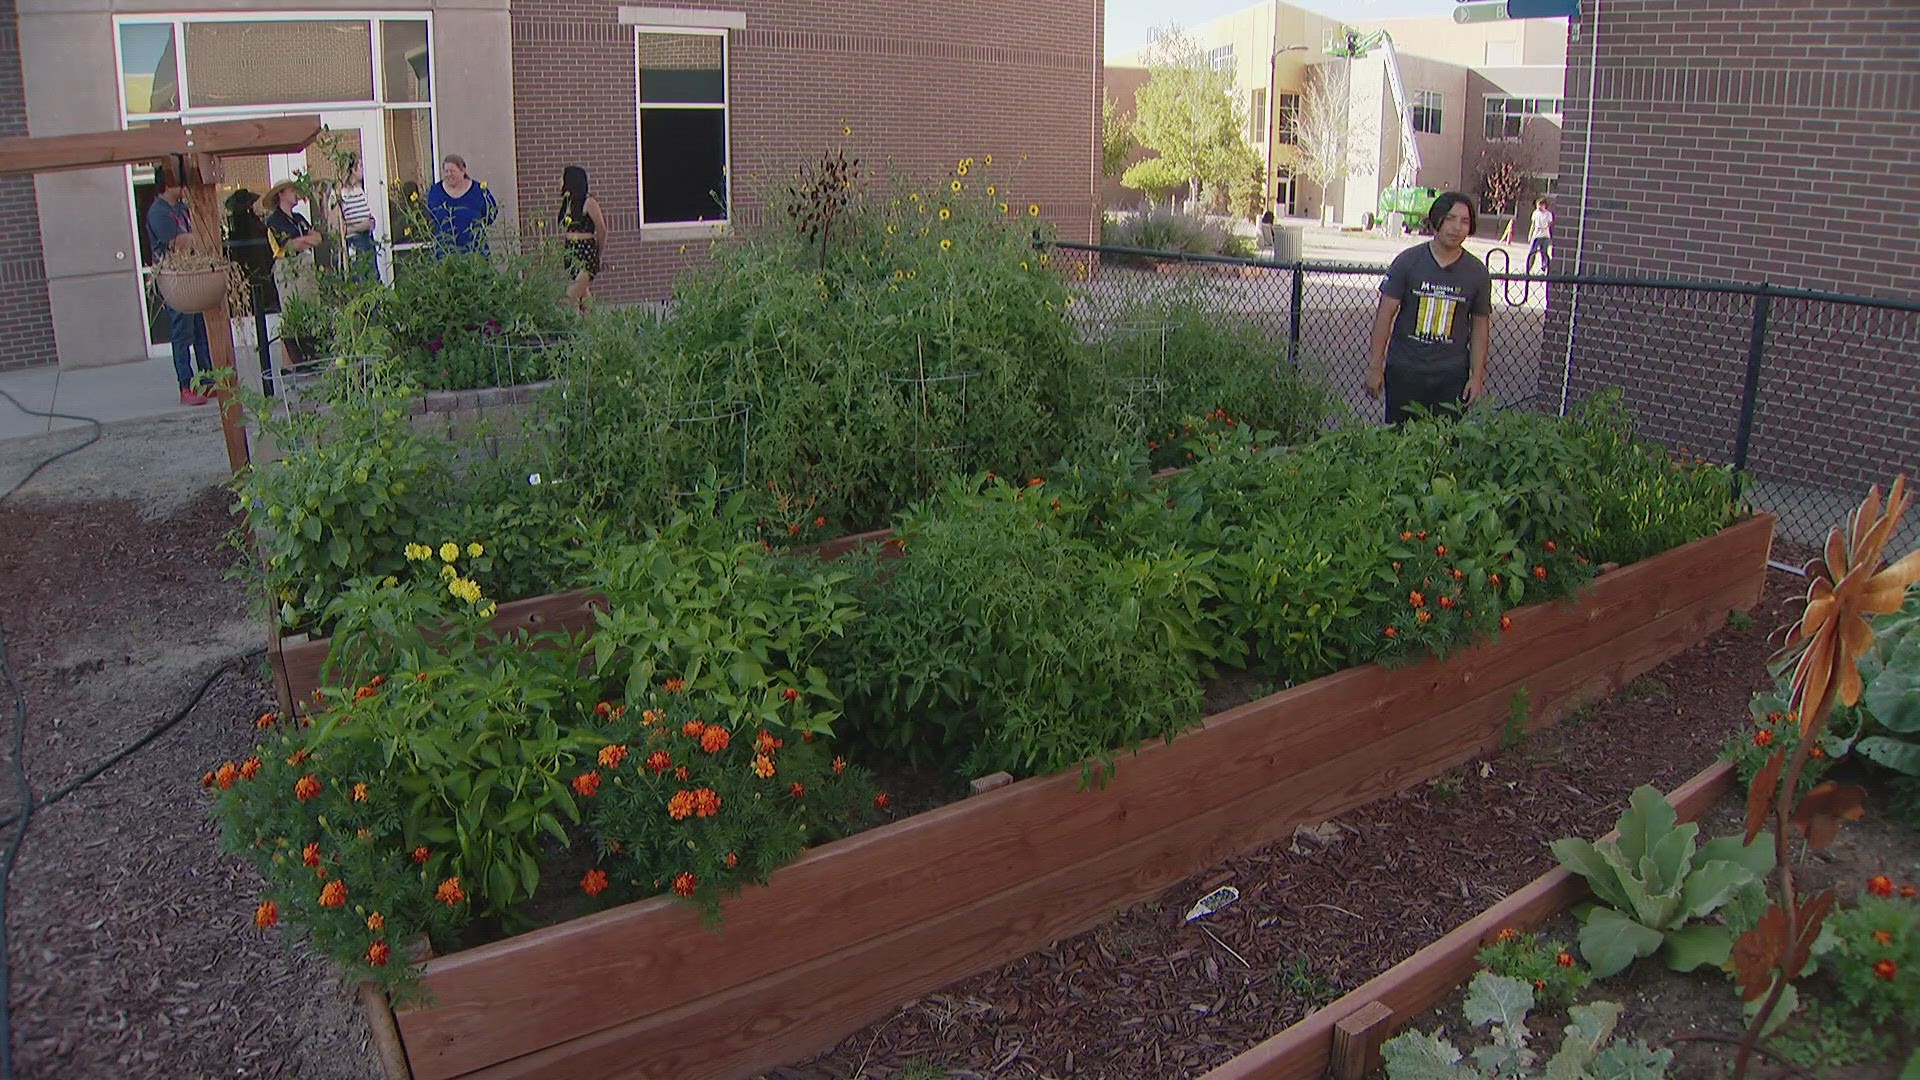 A group of students created the garden last year at Vista Academy.